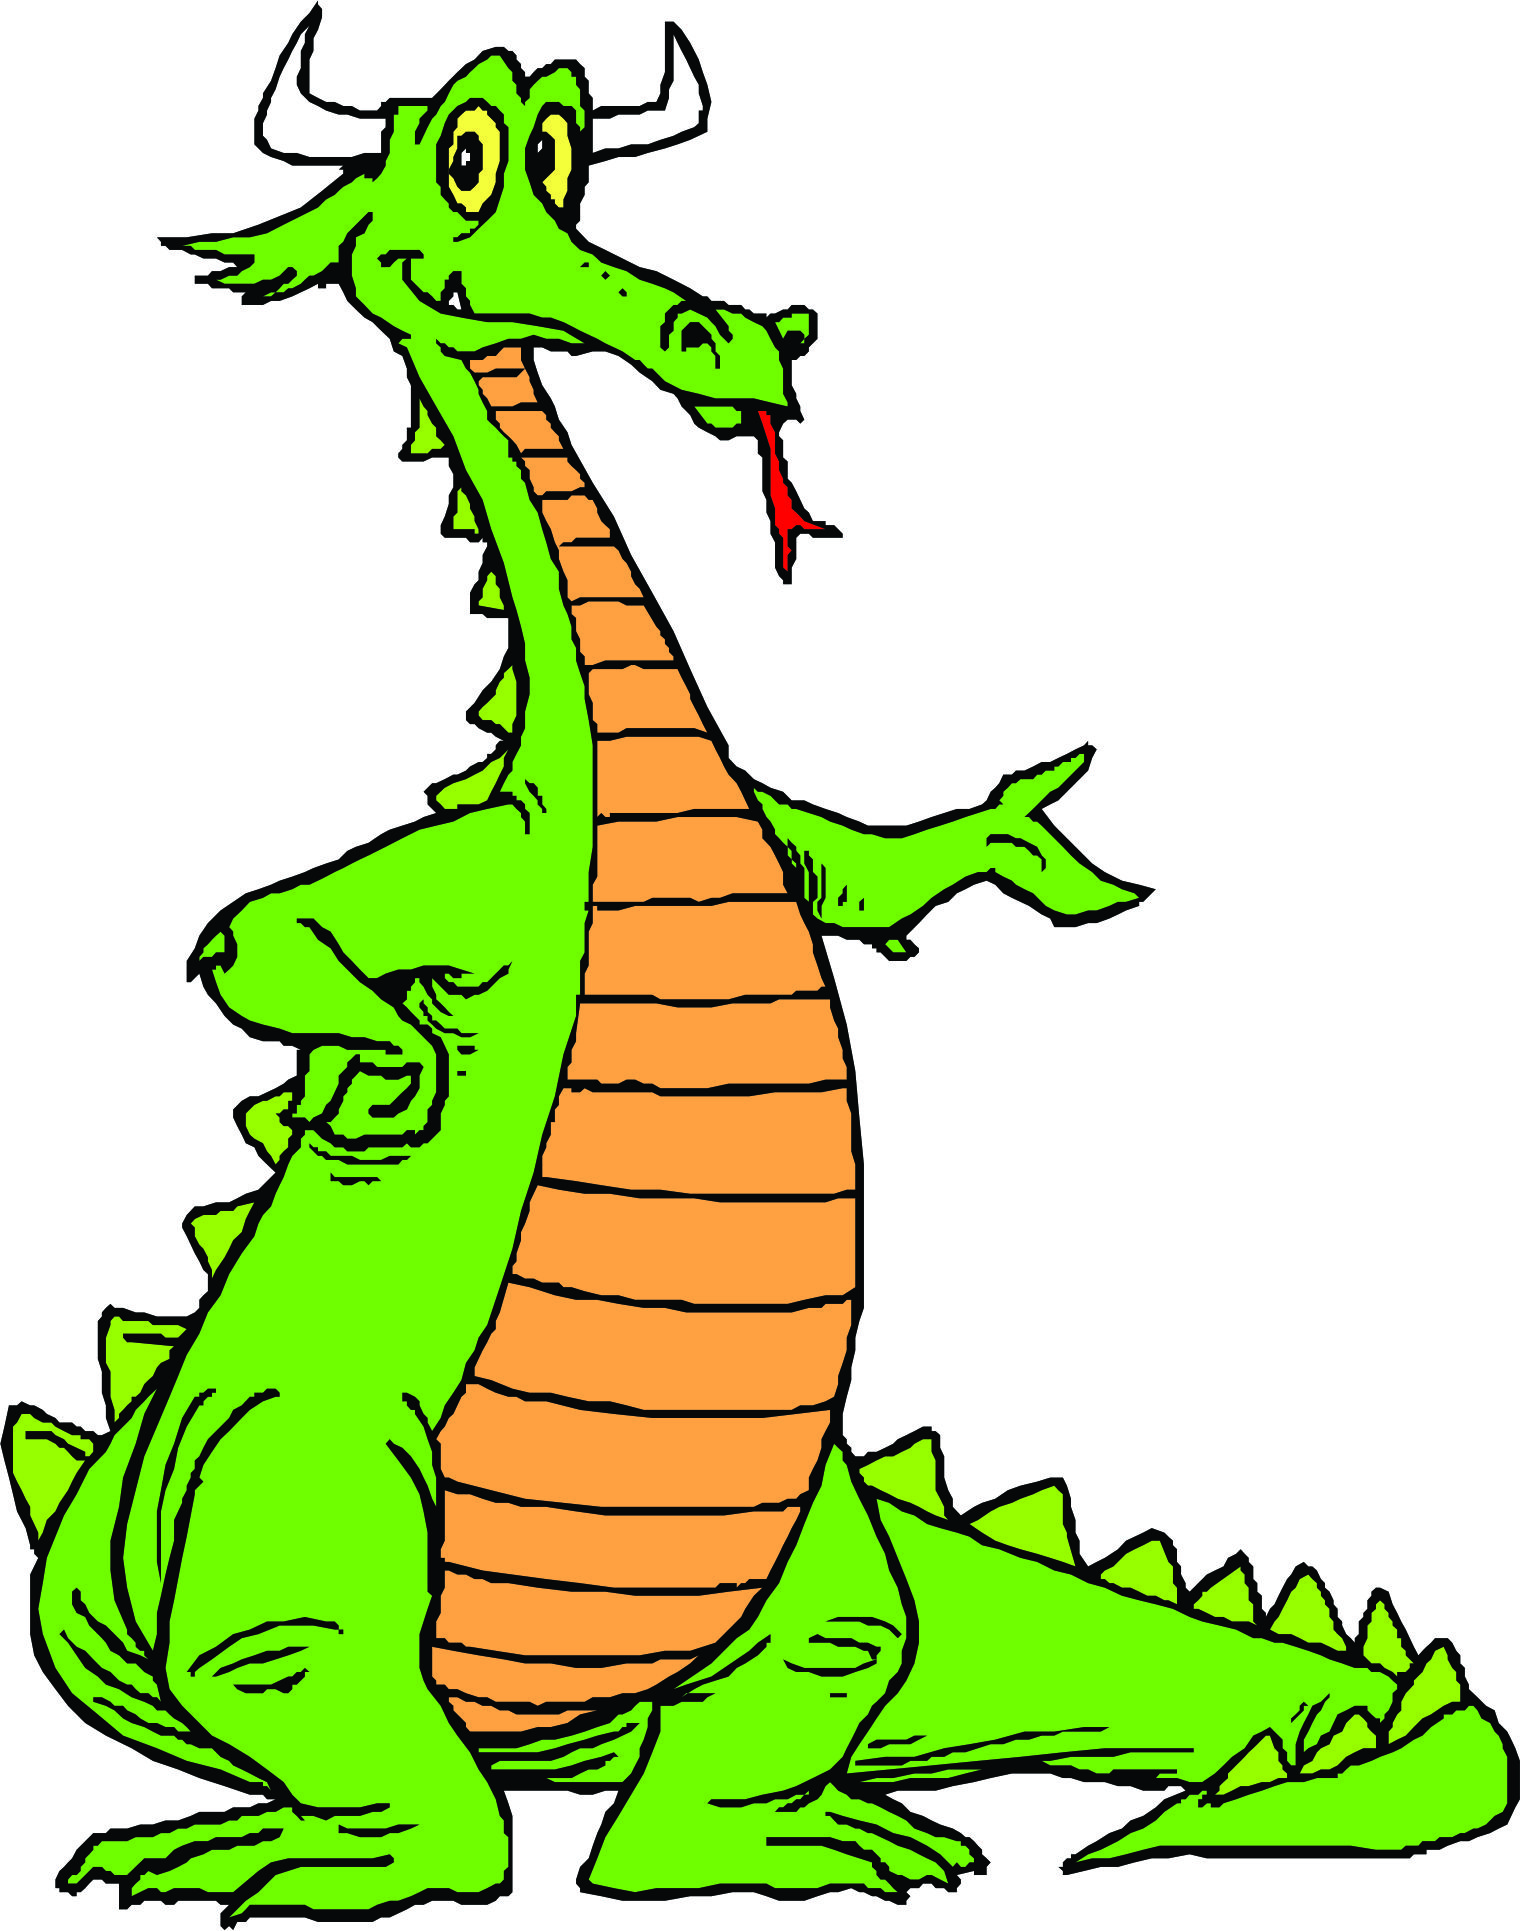 Cartoon Dragons | Page 2 - ClipArt Best - ClipArt Best